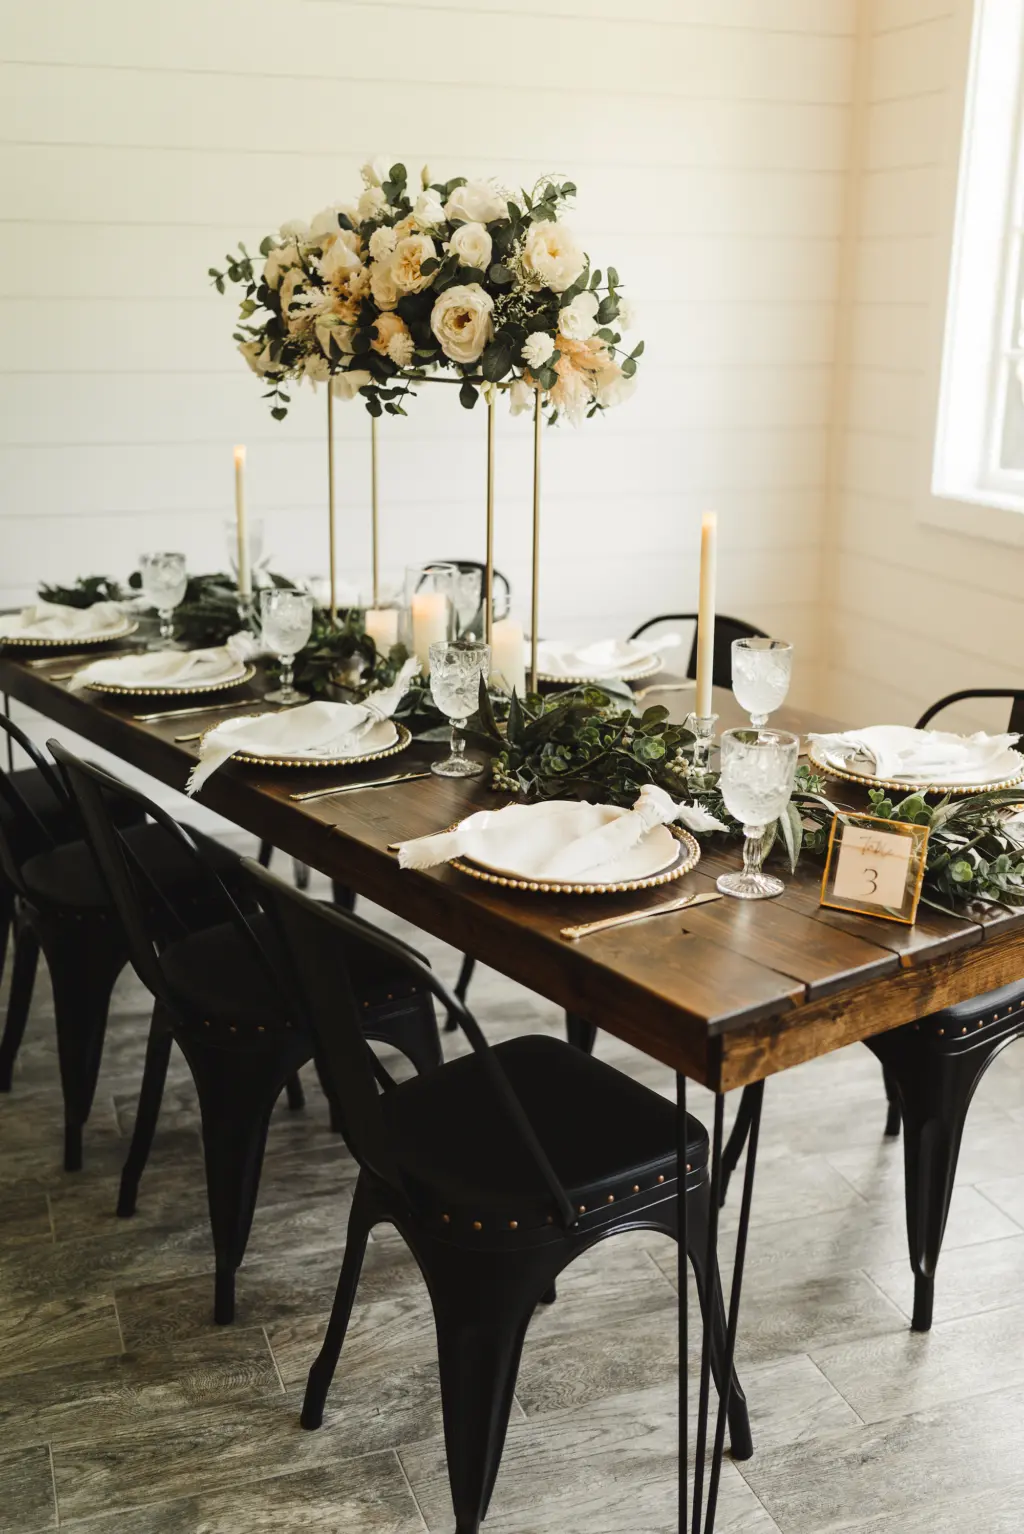 Modern and Rustic Indoor Wedding Reception | Tall Flower Stand Centerpieces with White Roses and Greenery | White and Gold Table Setting Ideas | Tampa Bay Florist Monarch Events and Design